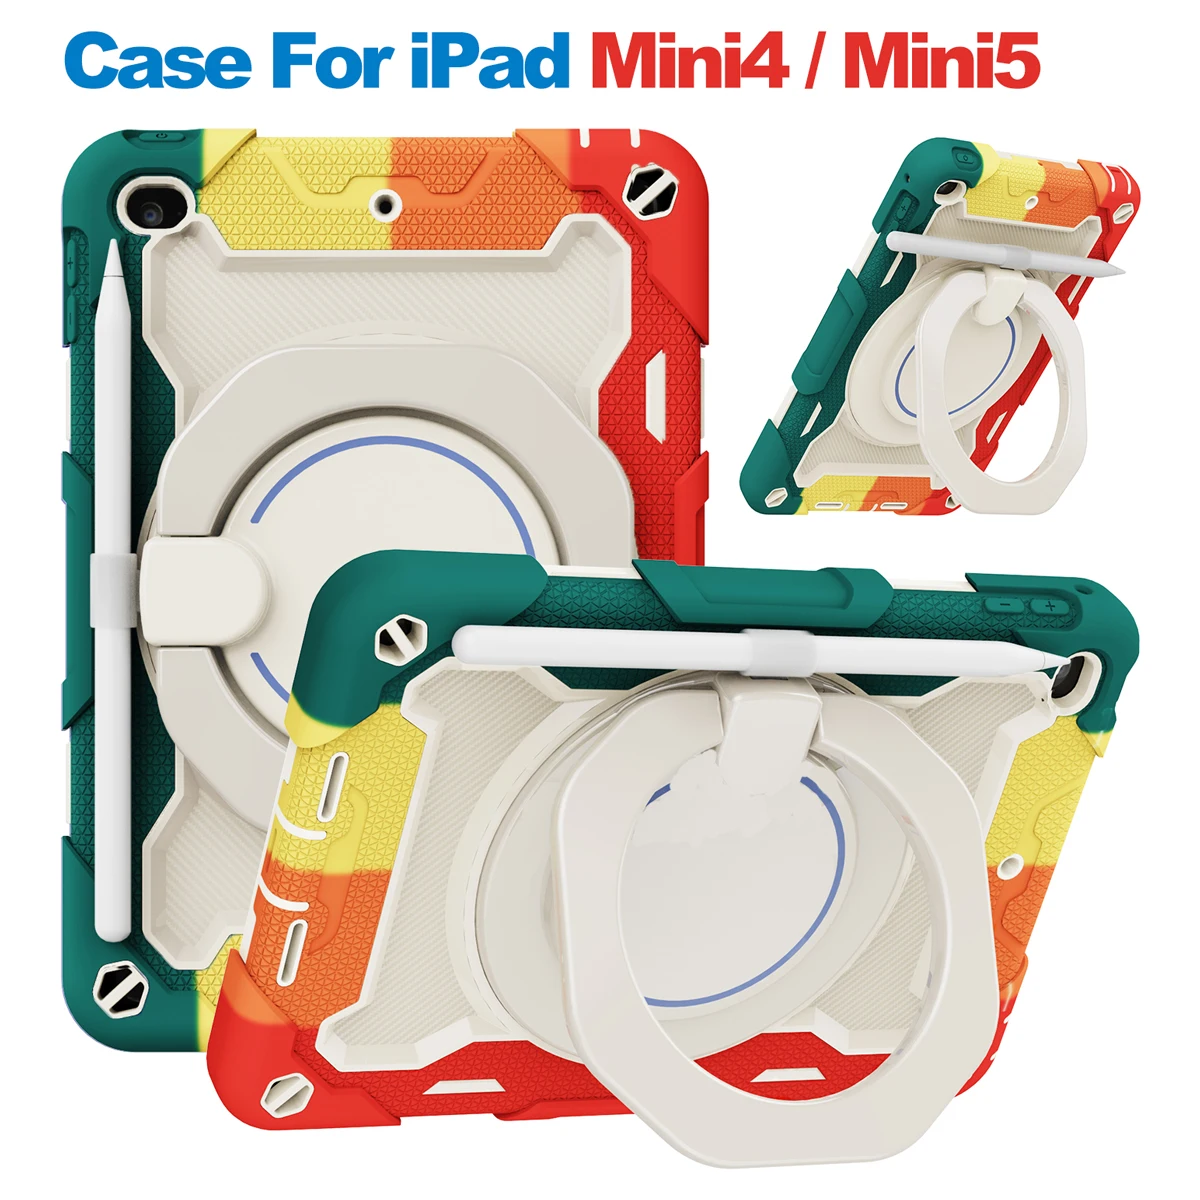 

Case For iPad Mini 5 7.9inch Mini4 New Hybrid Armored Kids Silicon Cover Shockproof Rugged Drop Protective Case with Kickstand